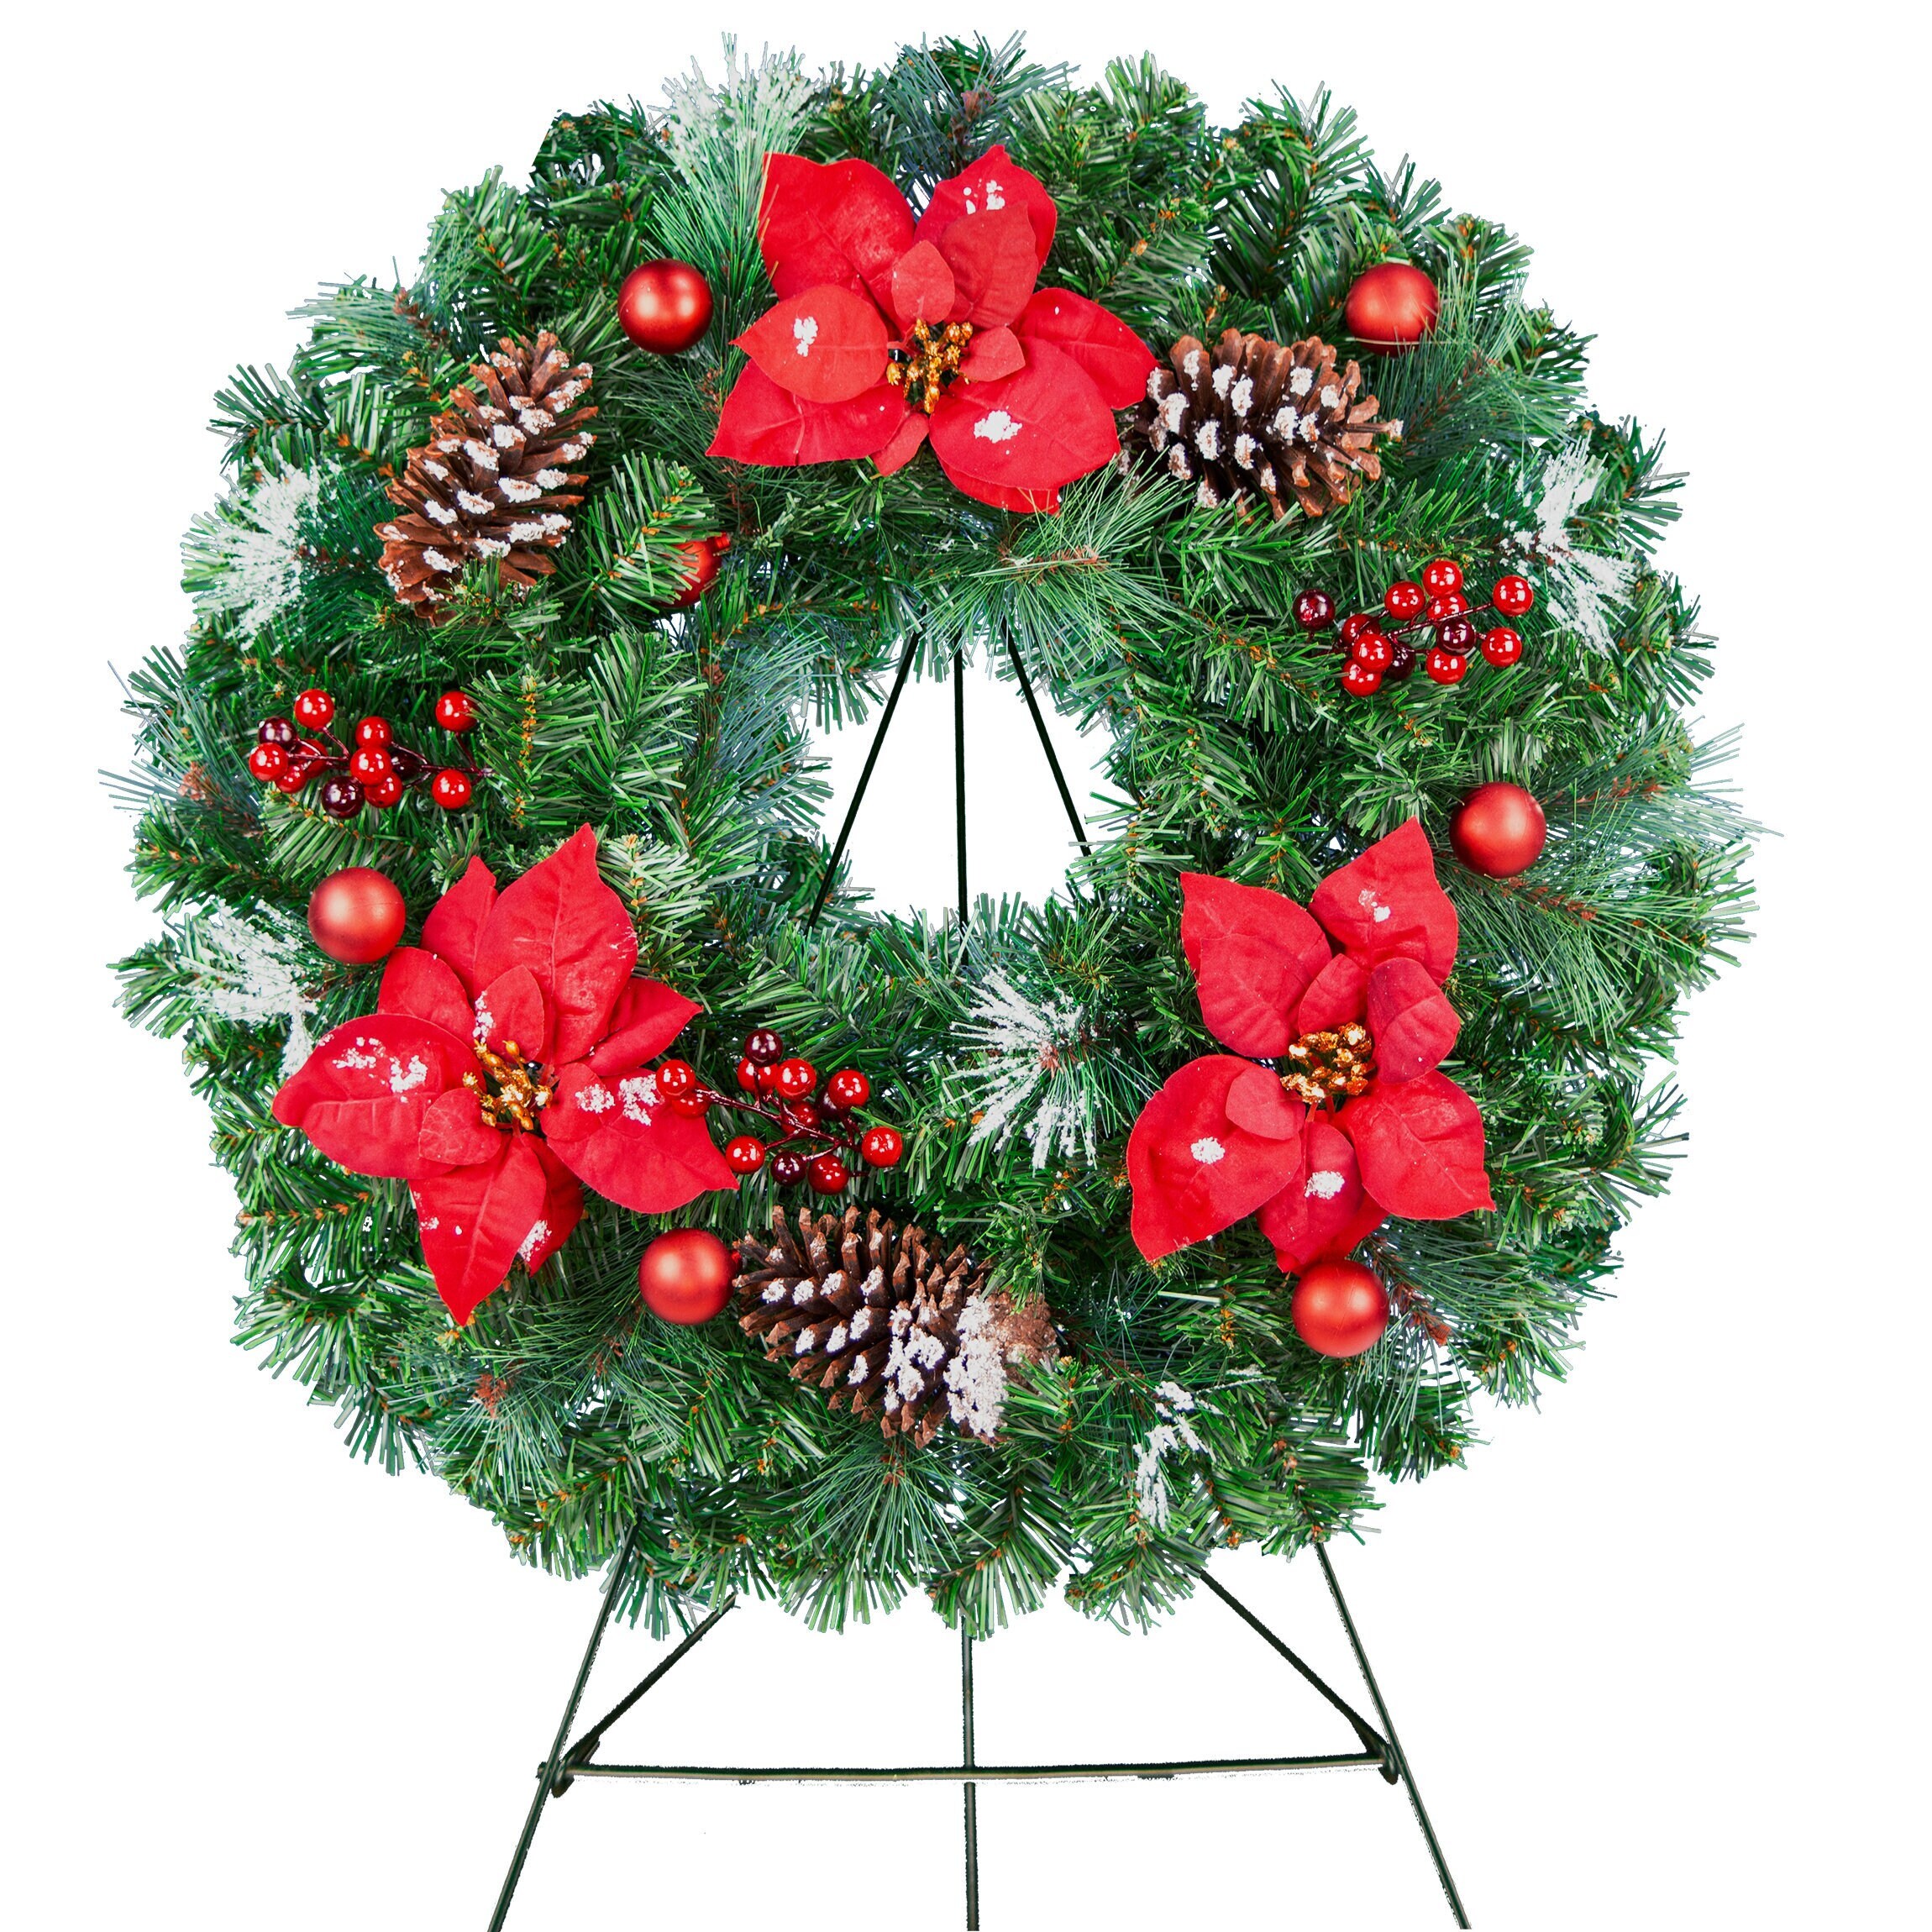 Stands for Cemetery Wreaths 